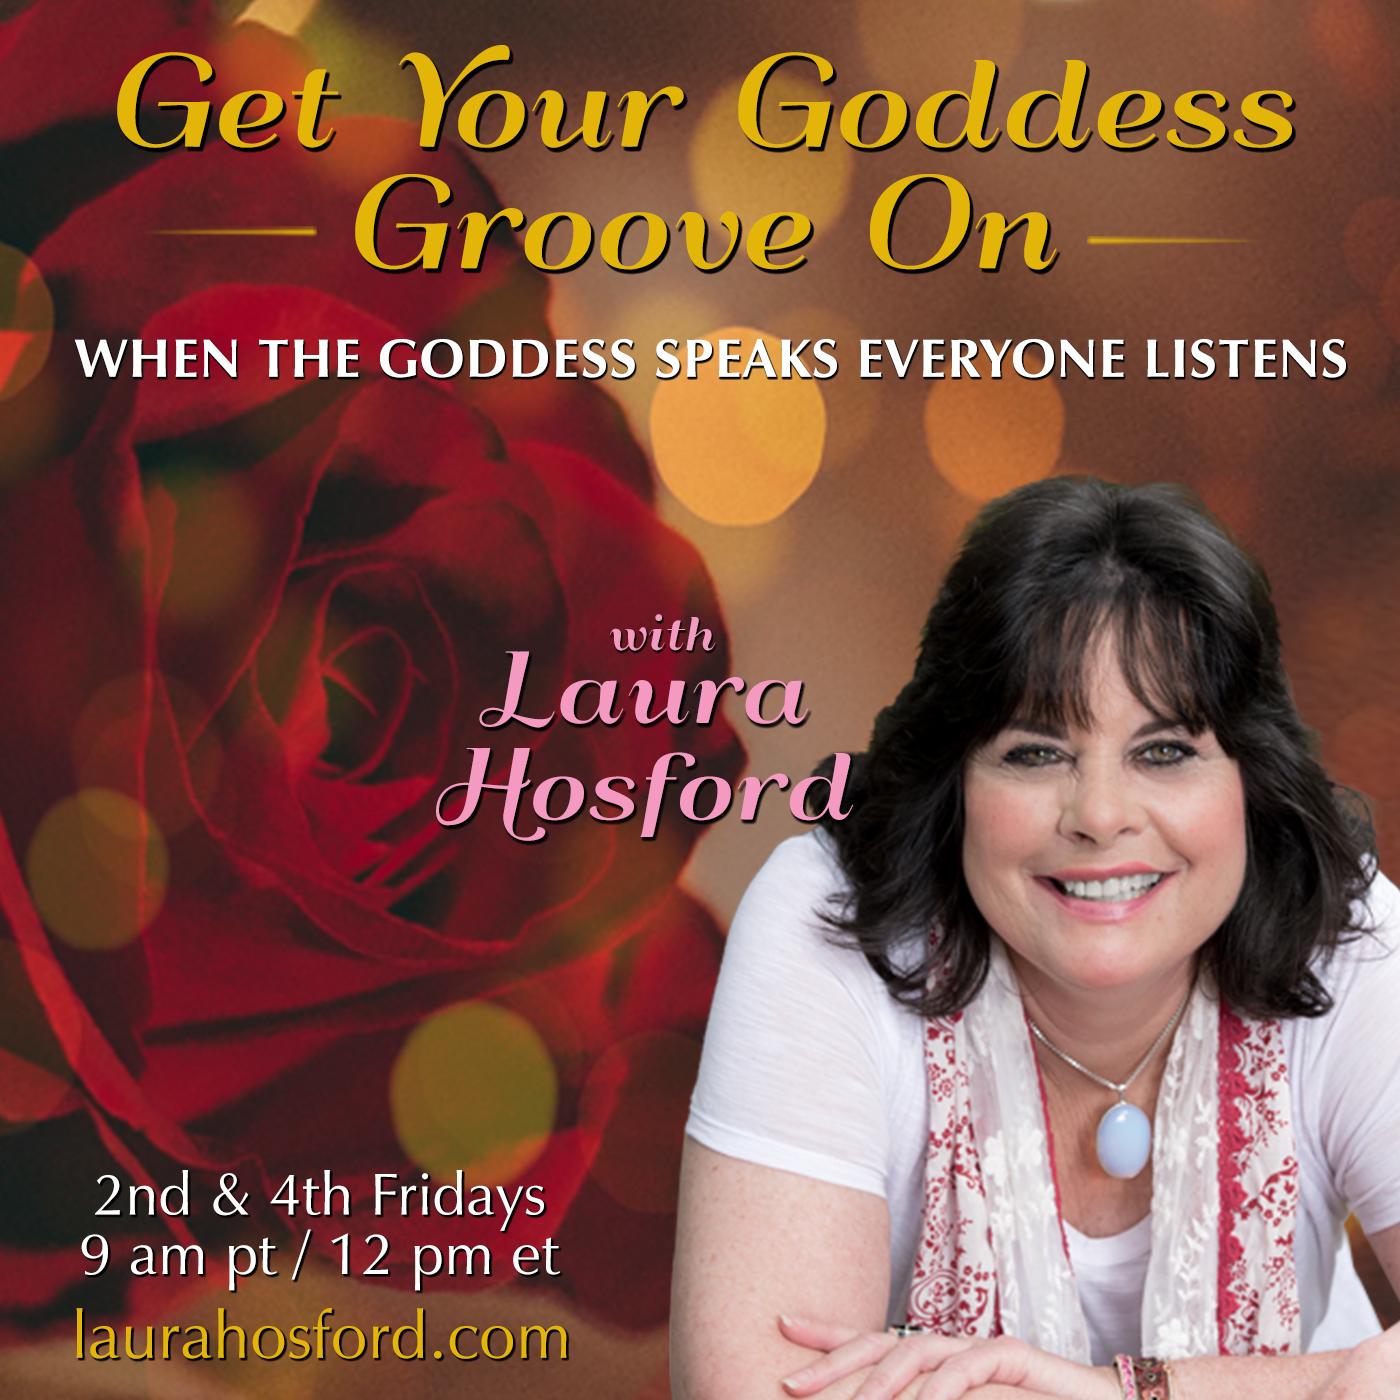 Get Your Goddess Groove On with Laura Hosford